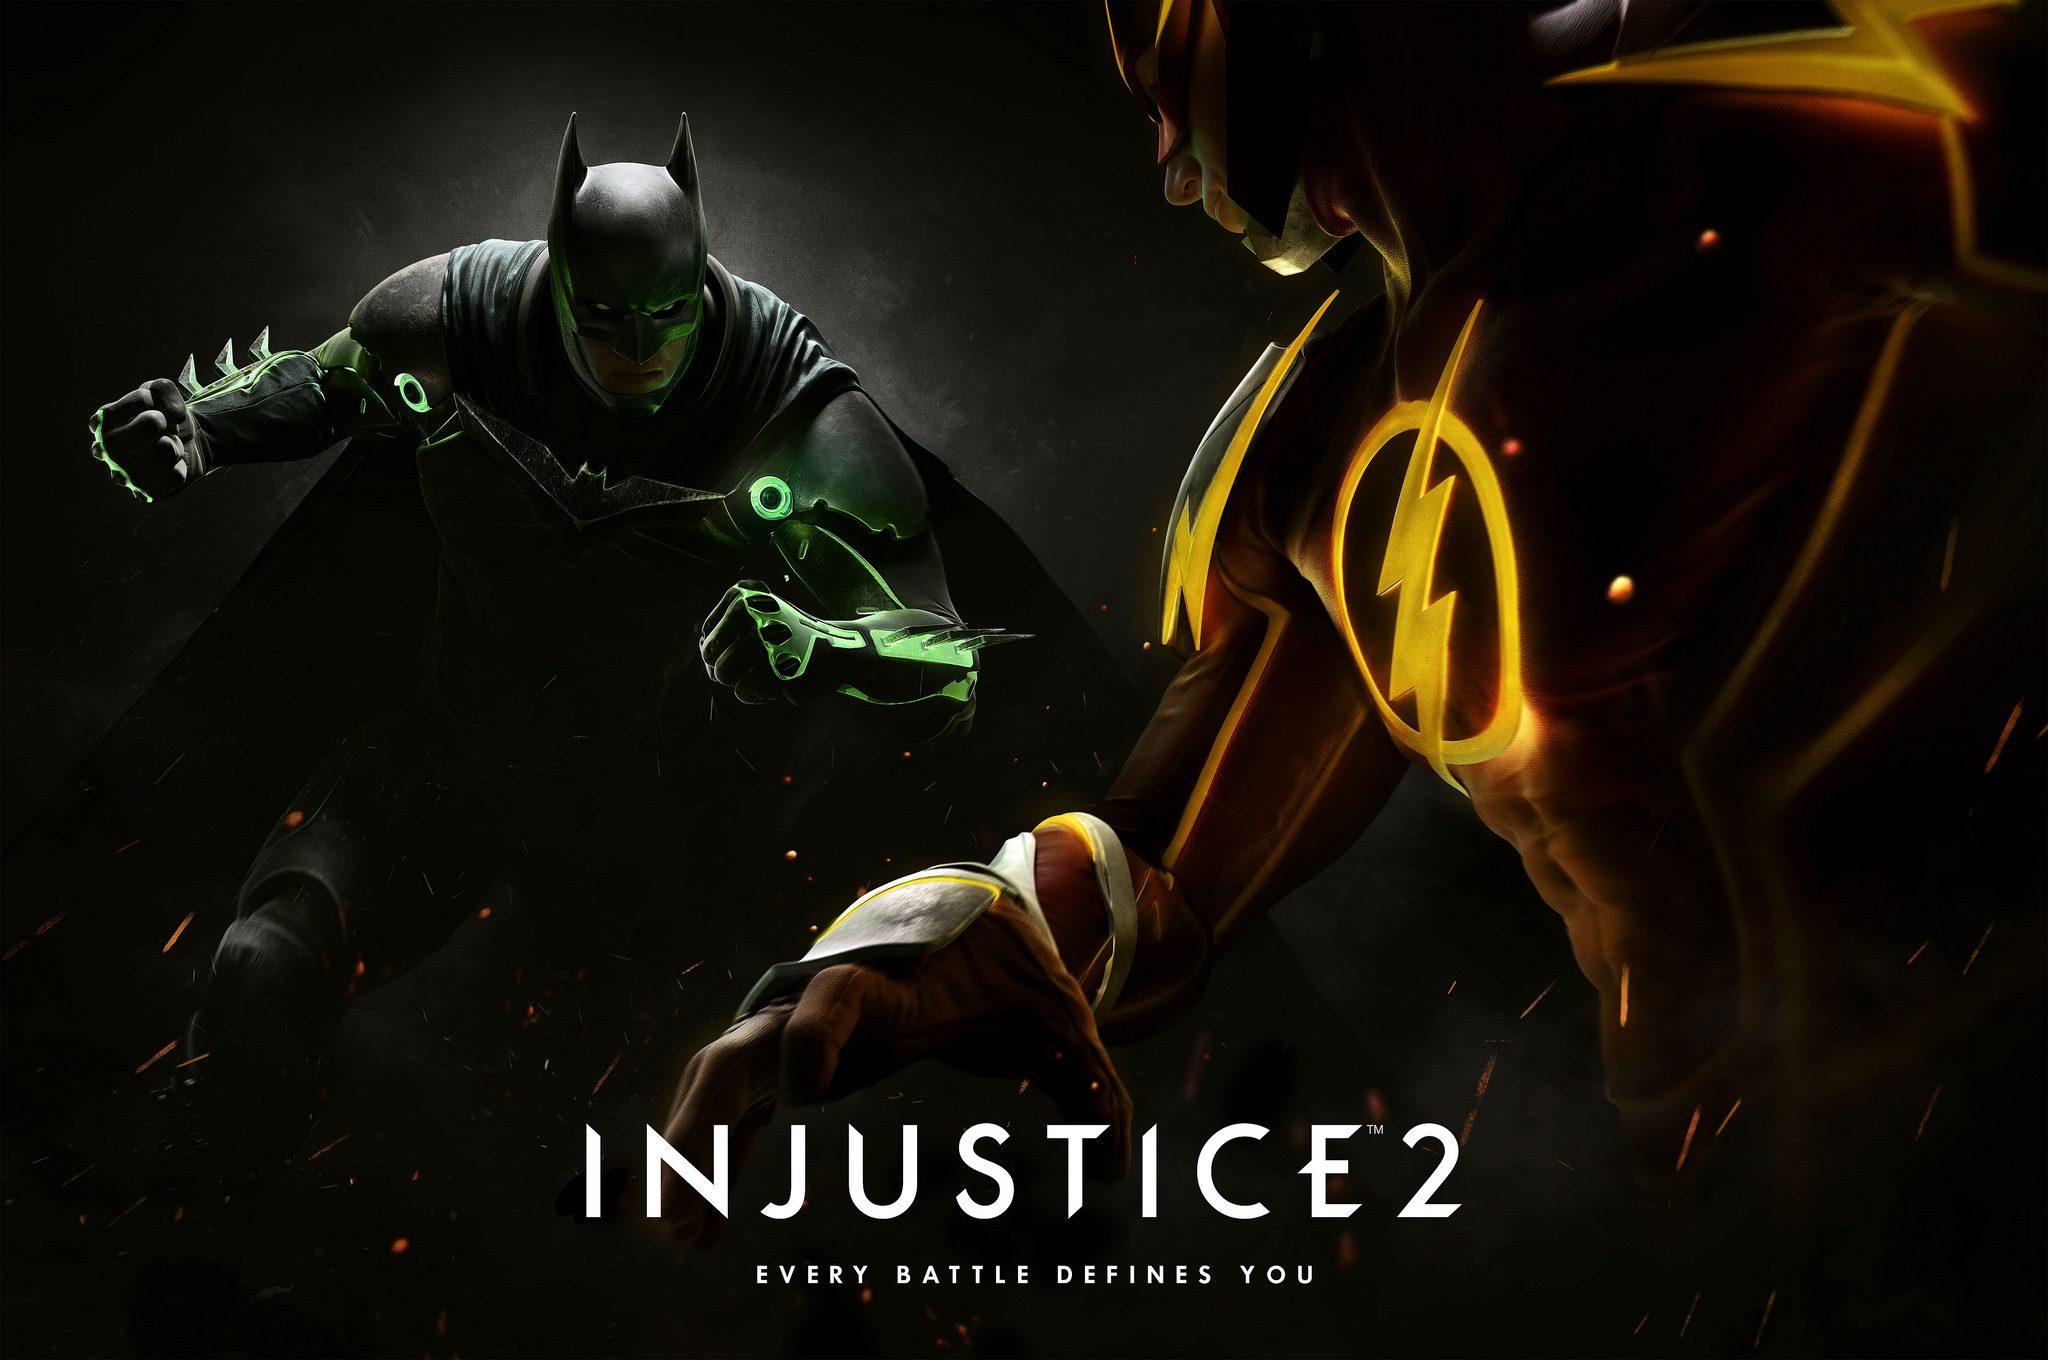 Injustice 2 Revealed, Coming to PS4 in 2017 PlayStation.Blog